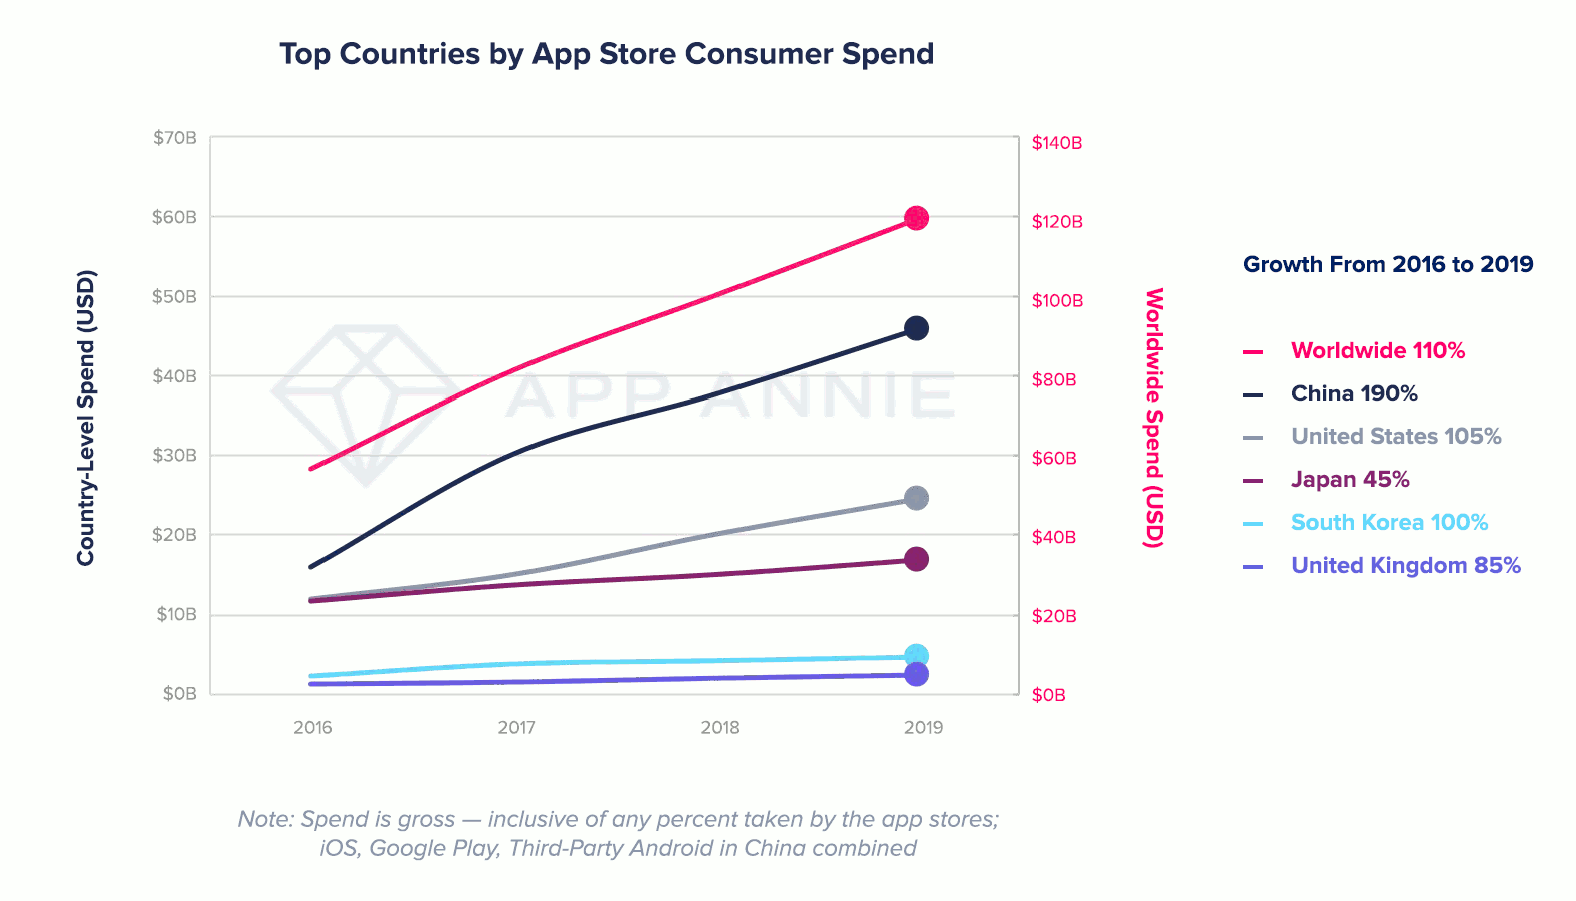 Top country by App store consumer spend